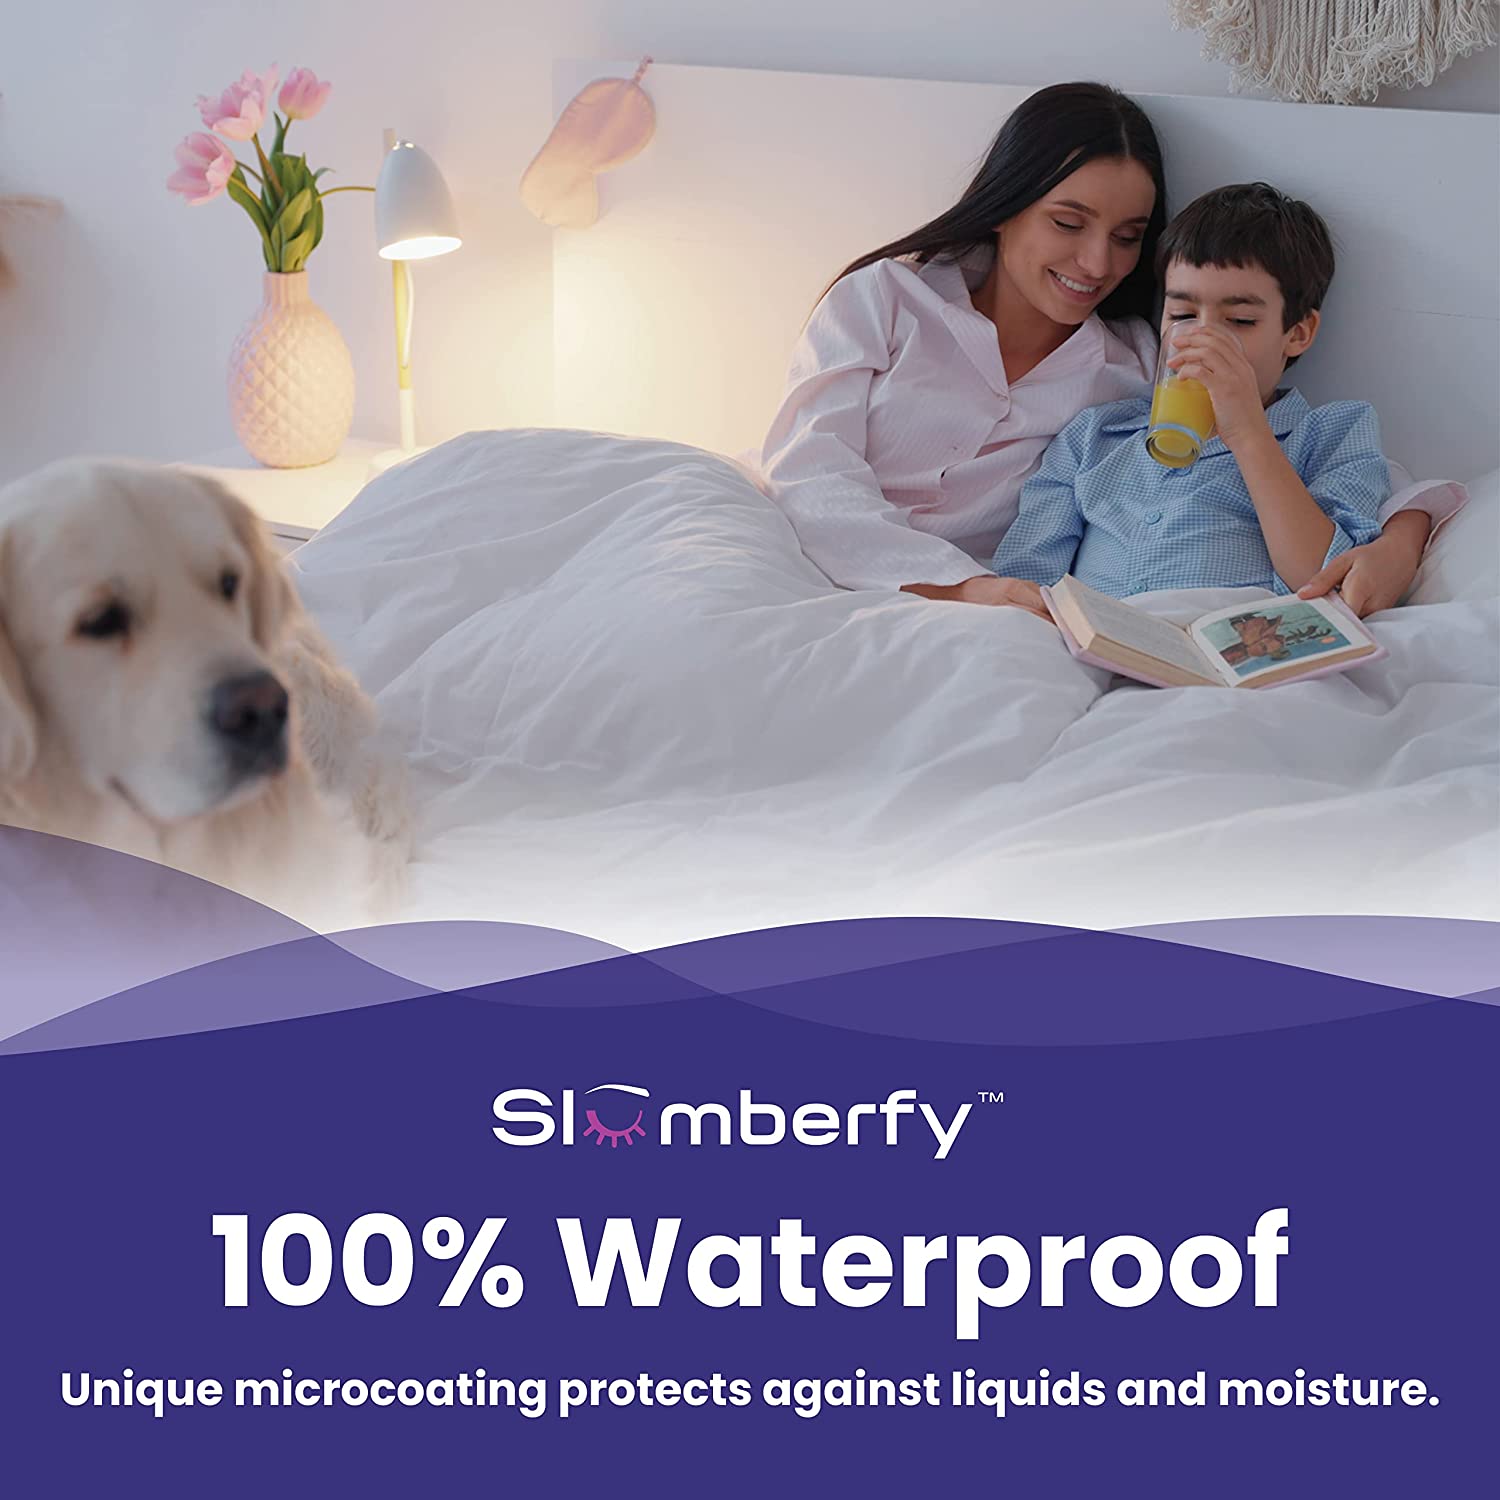 Queen Size Waterproof Mattress Protector - Fitted Sheet Style - Hypoallergenic Premium Quality Cover Protects Against Dust Mites